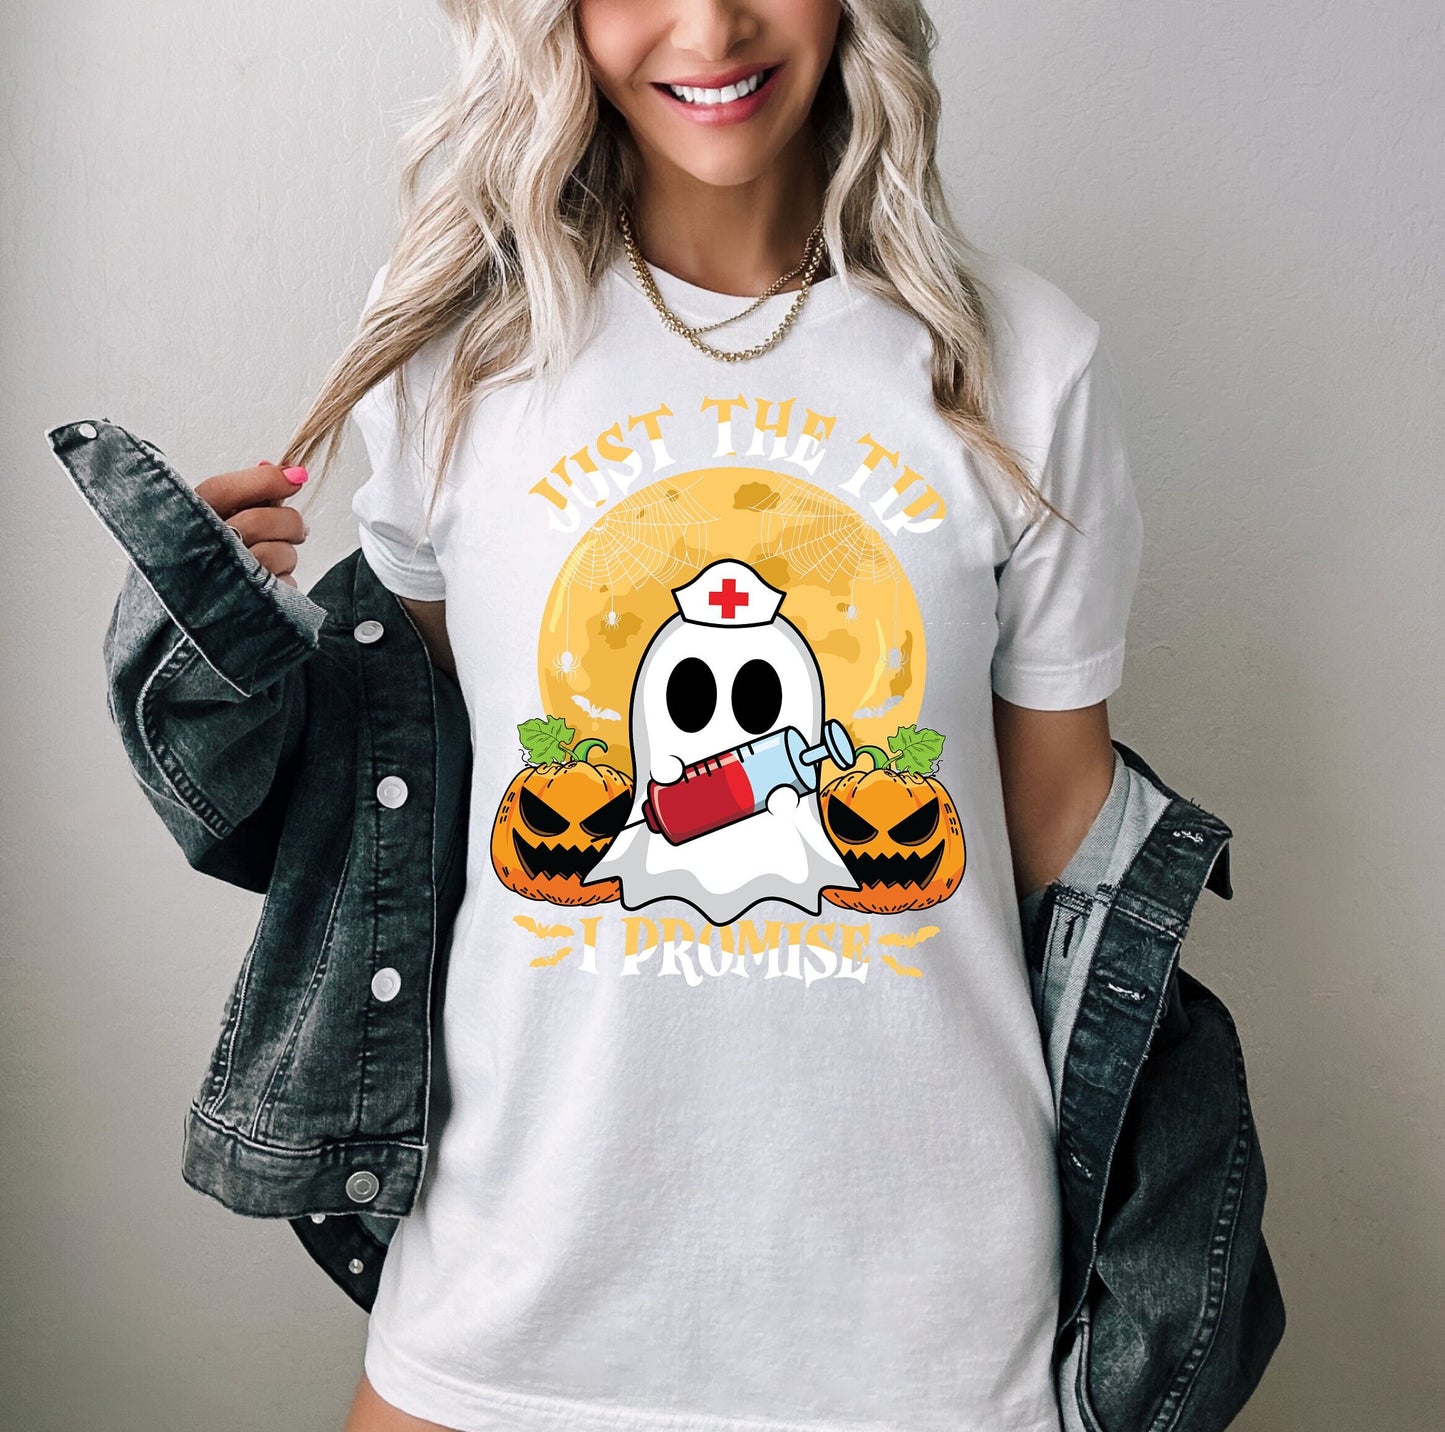 Just the Tip I promise Halloween Nursing Ghost T shirt.  This stylish Tee has a cool design of a Ghost with a nurse hat holding a syringe next to pumpkins spiders and bats. Makes a perfect gift for Halloween and for nurses.
www.scorpiontees.etsy.com